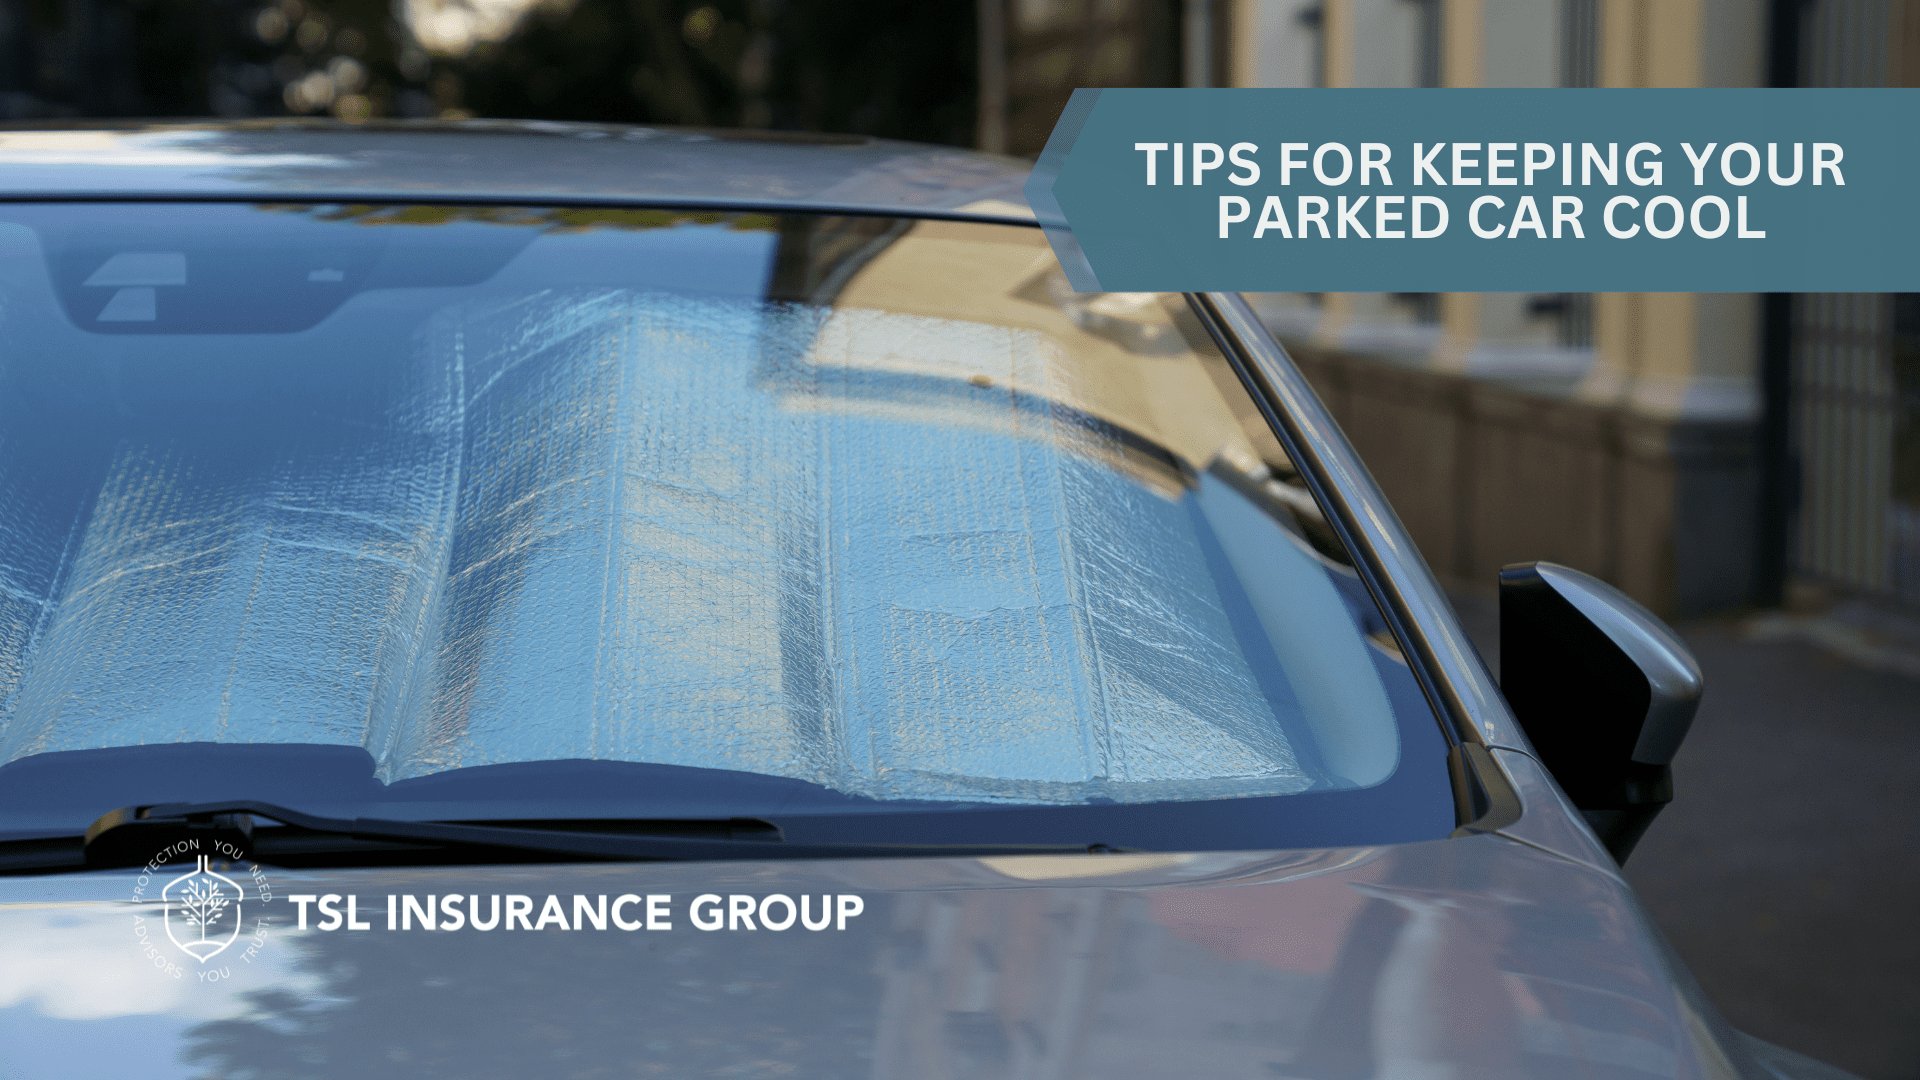 Car Care Tips If You're Parking Your Vehicle Short-Term